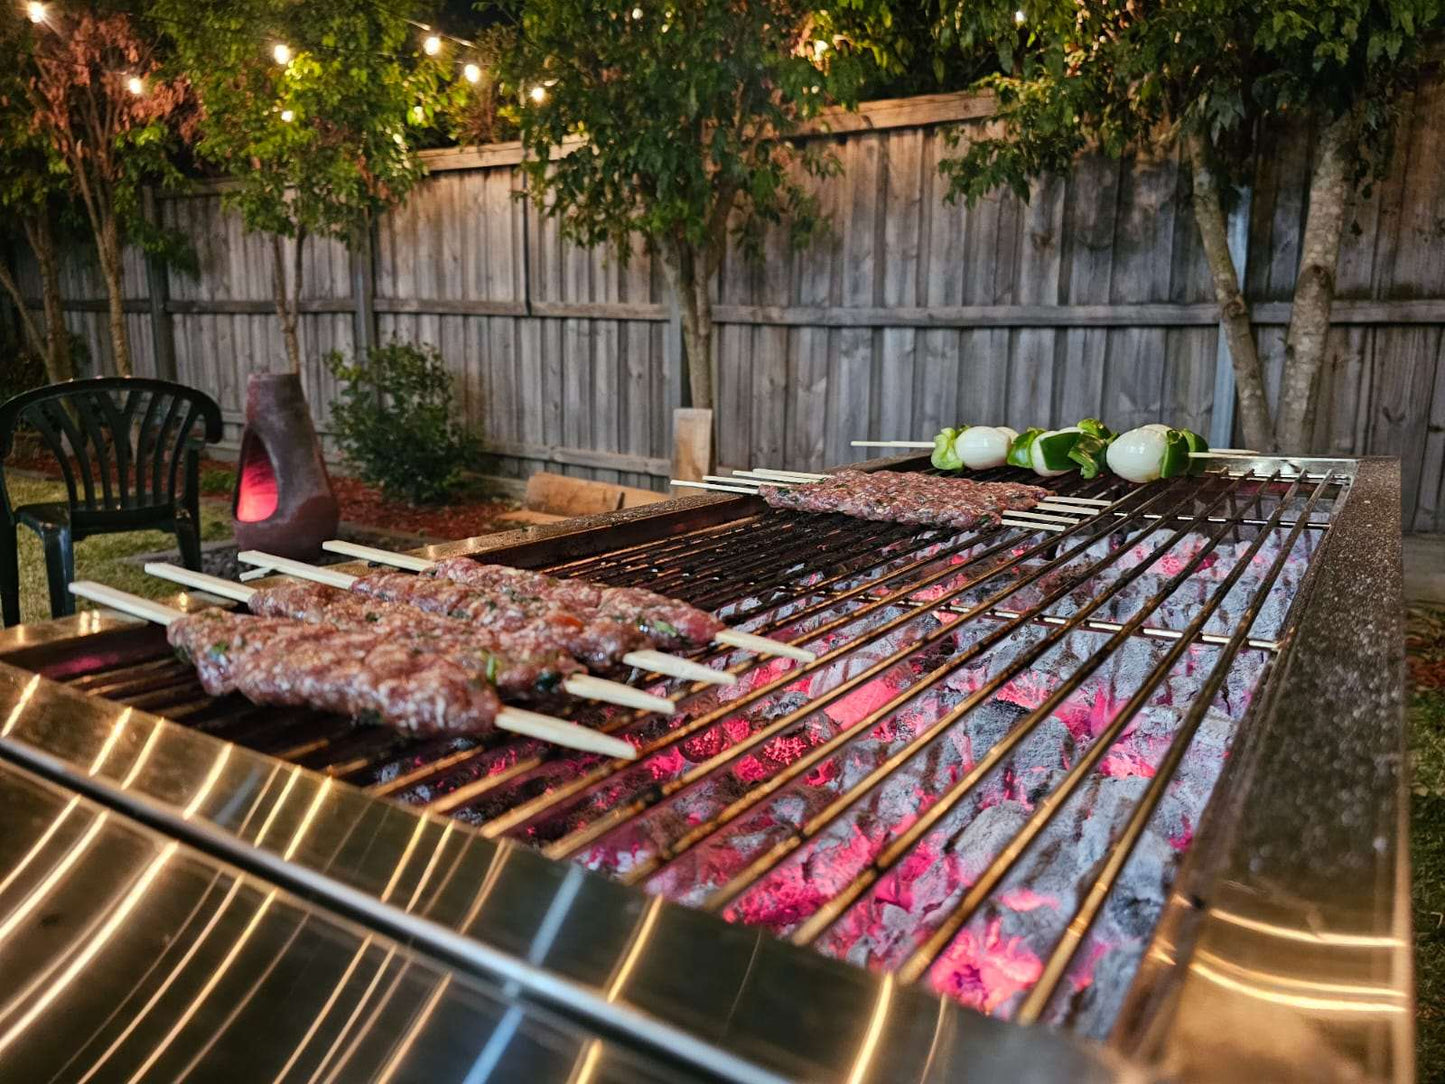 skewers on charcoal grill using mallee lump